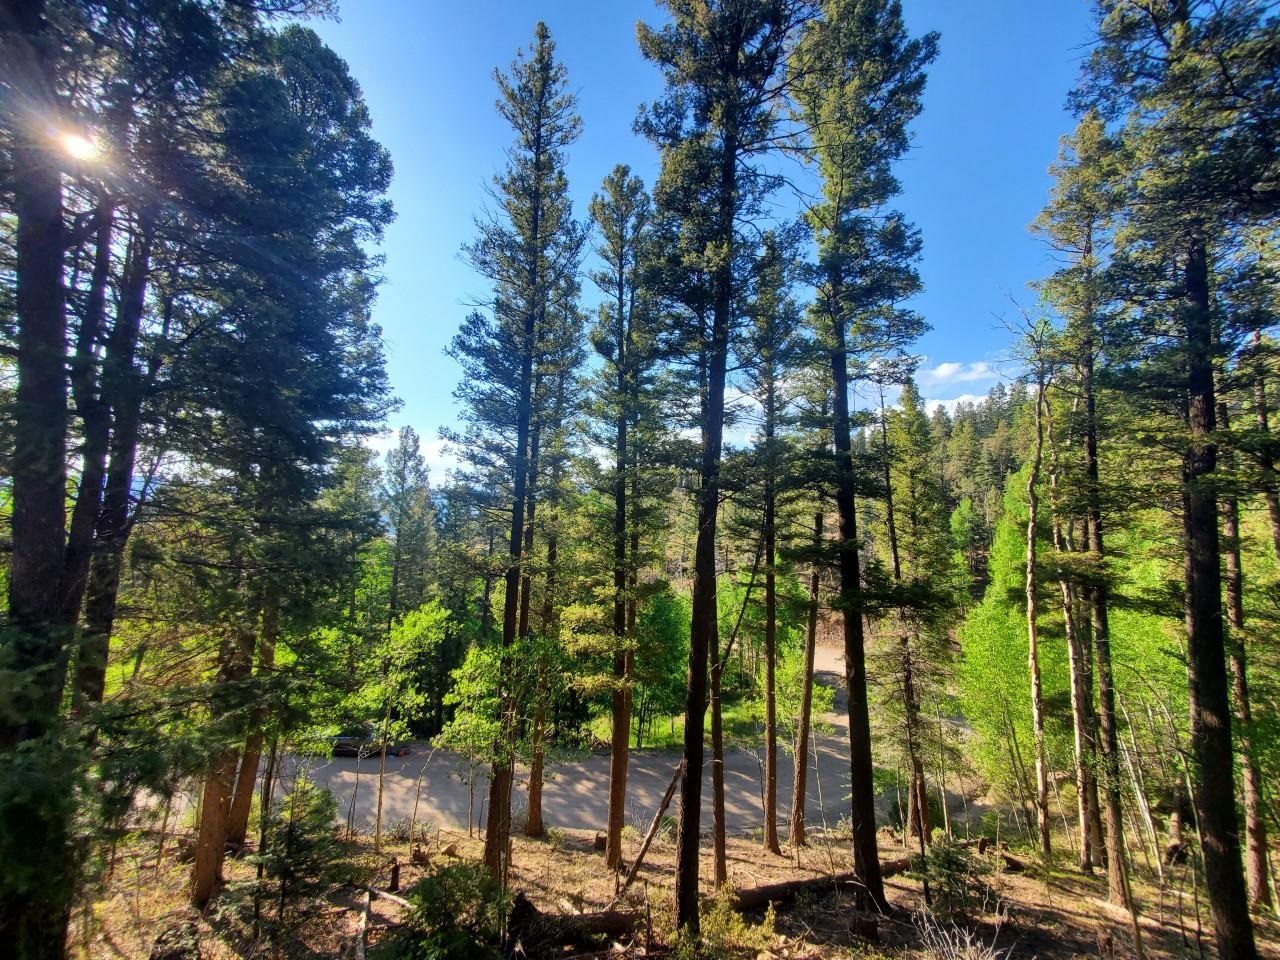 Great wooded lot with plenty of potential! There can be some amazing views with some maintenance and lot clearing. The location is ideal being so close to the slopes offering a great rental opportunity. Build your dream home in the mountains on this beautiful lot!